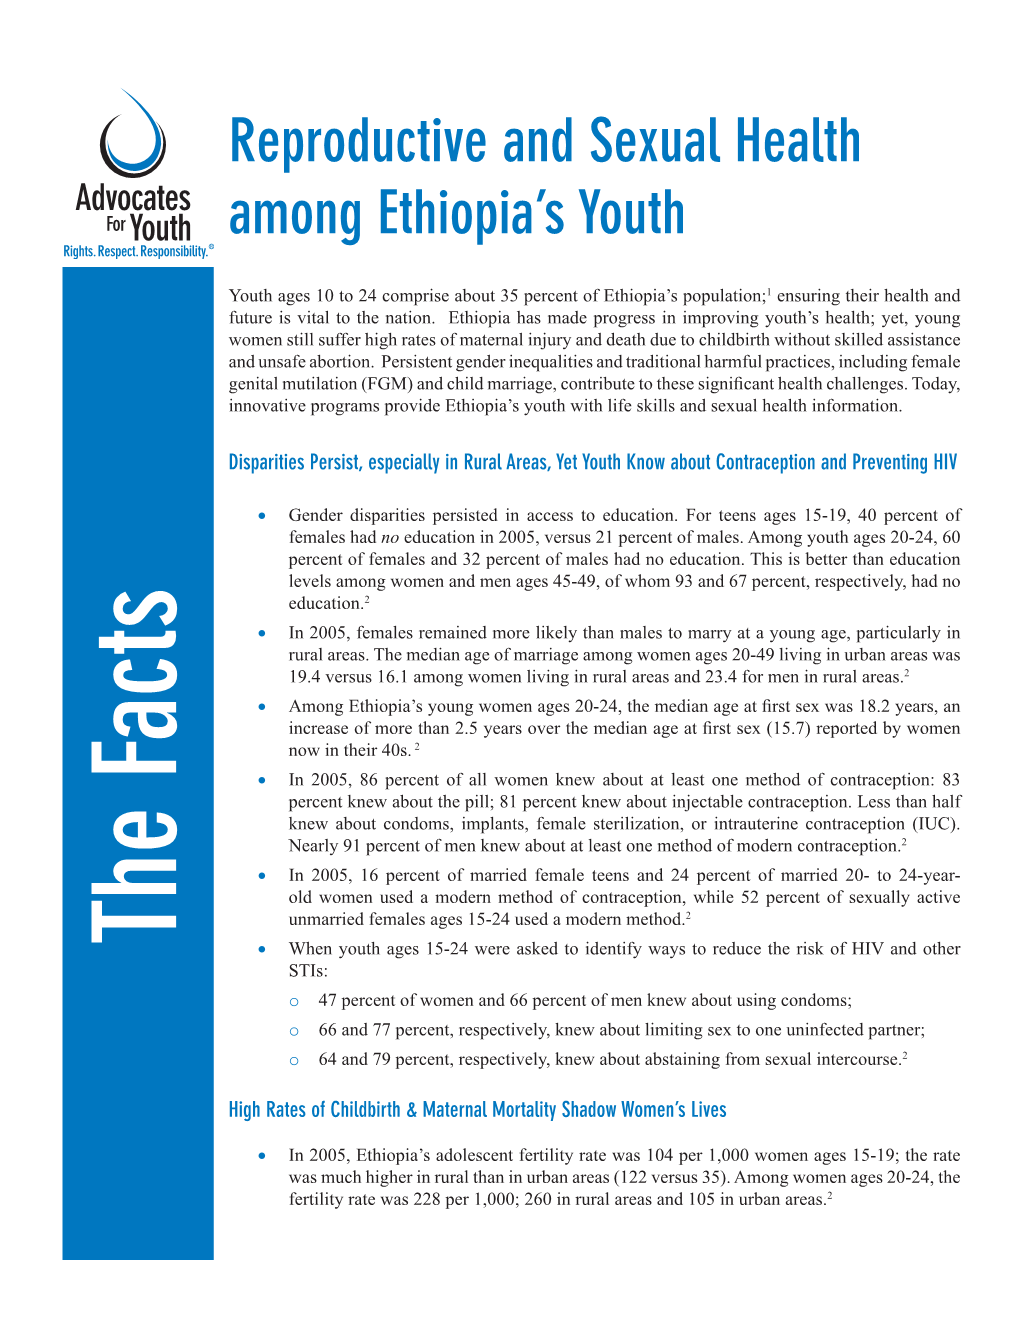 Reproductive and Sexual Health Among Ethiopia's Youth